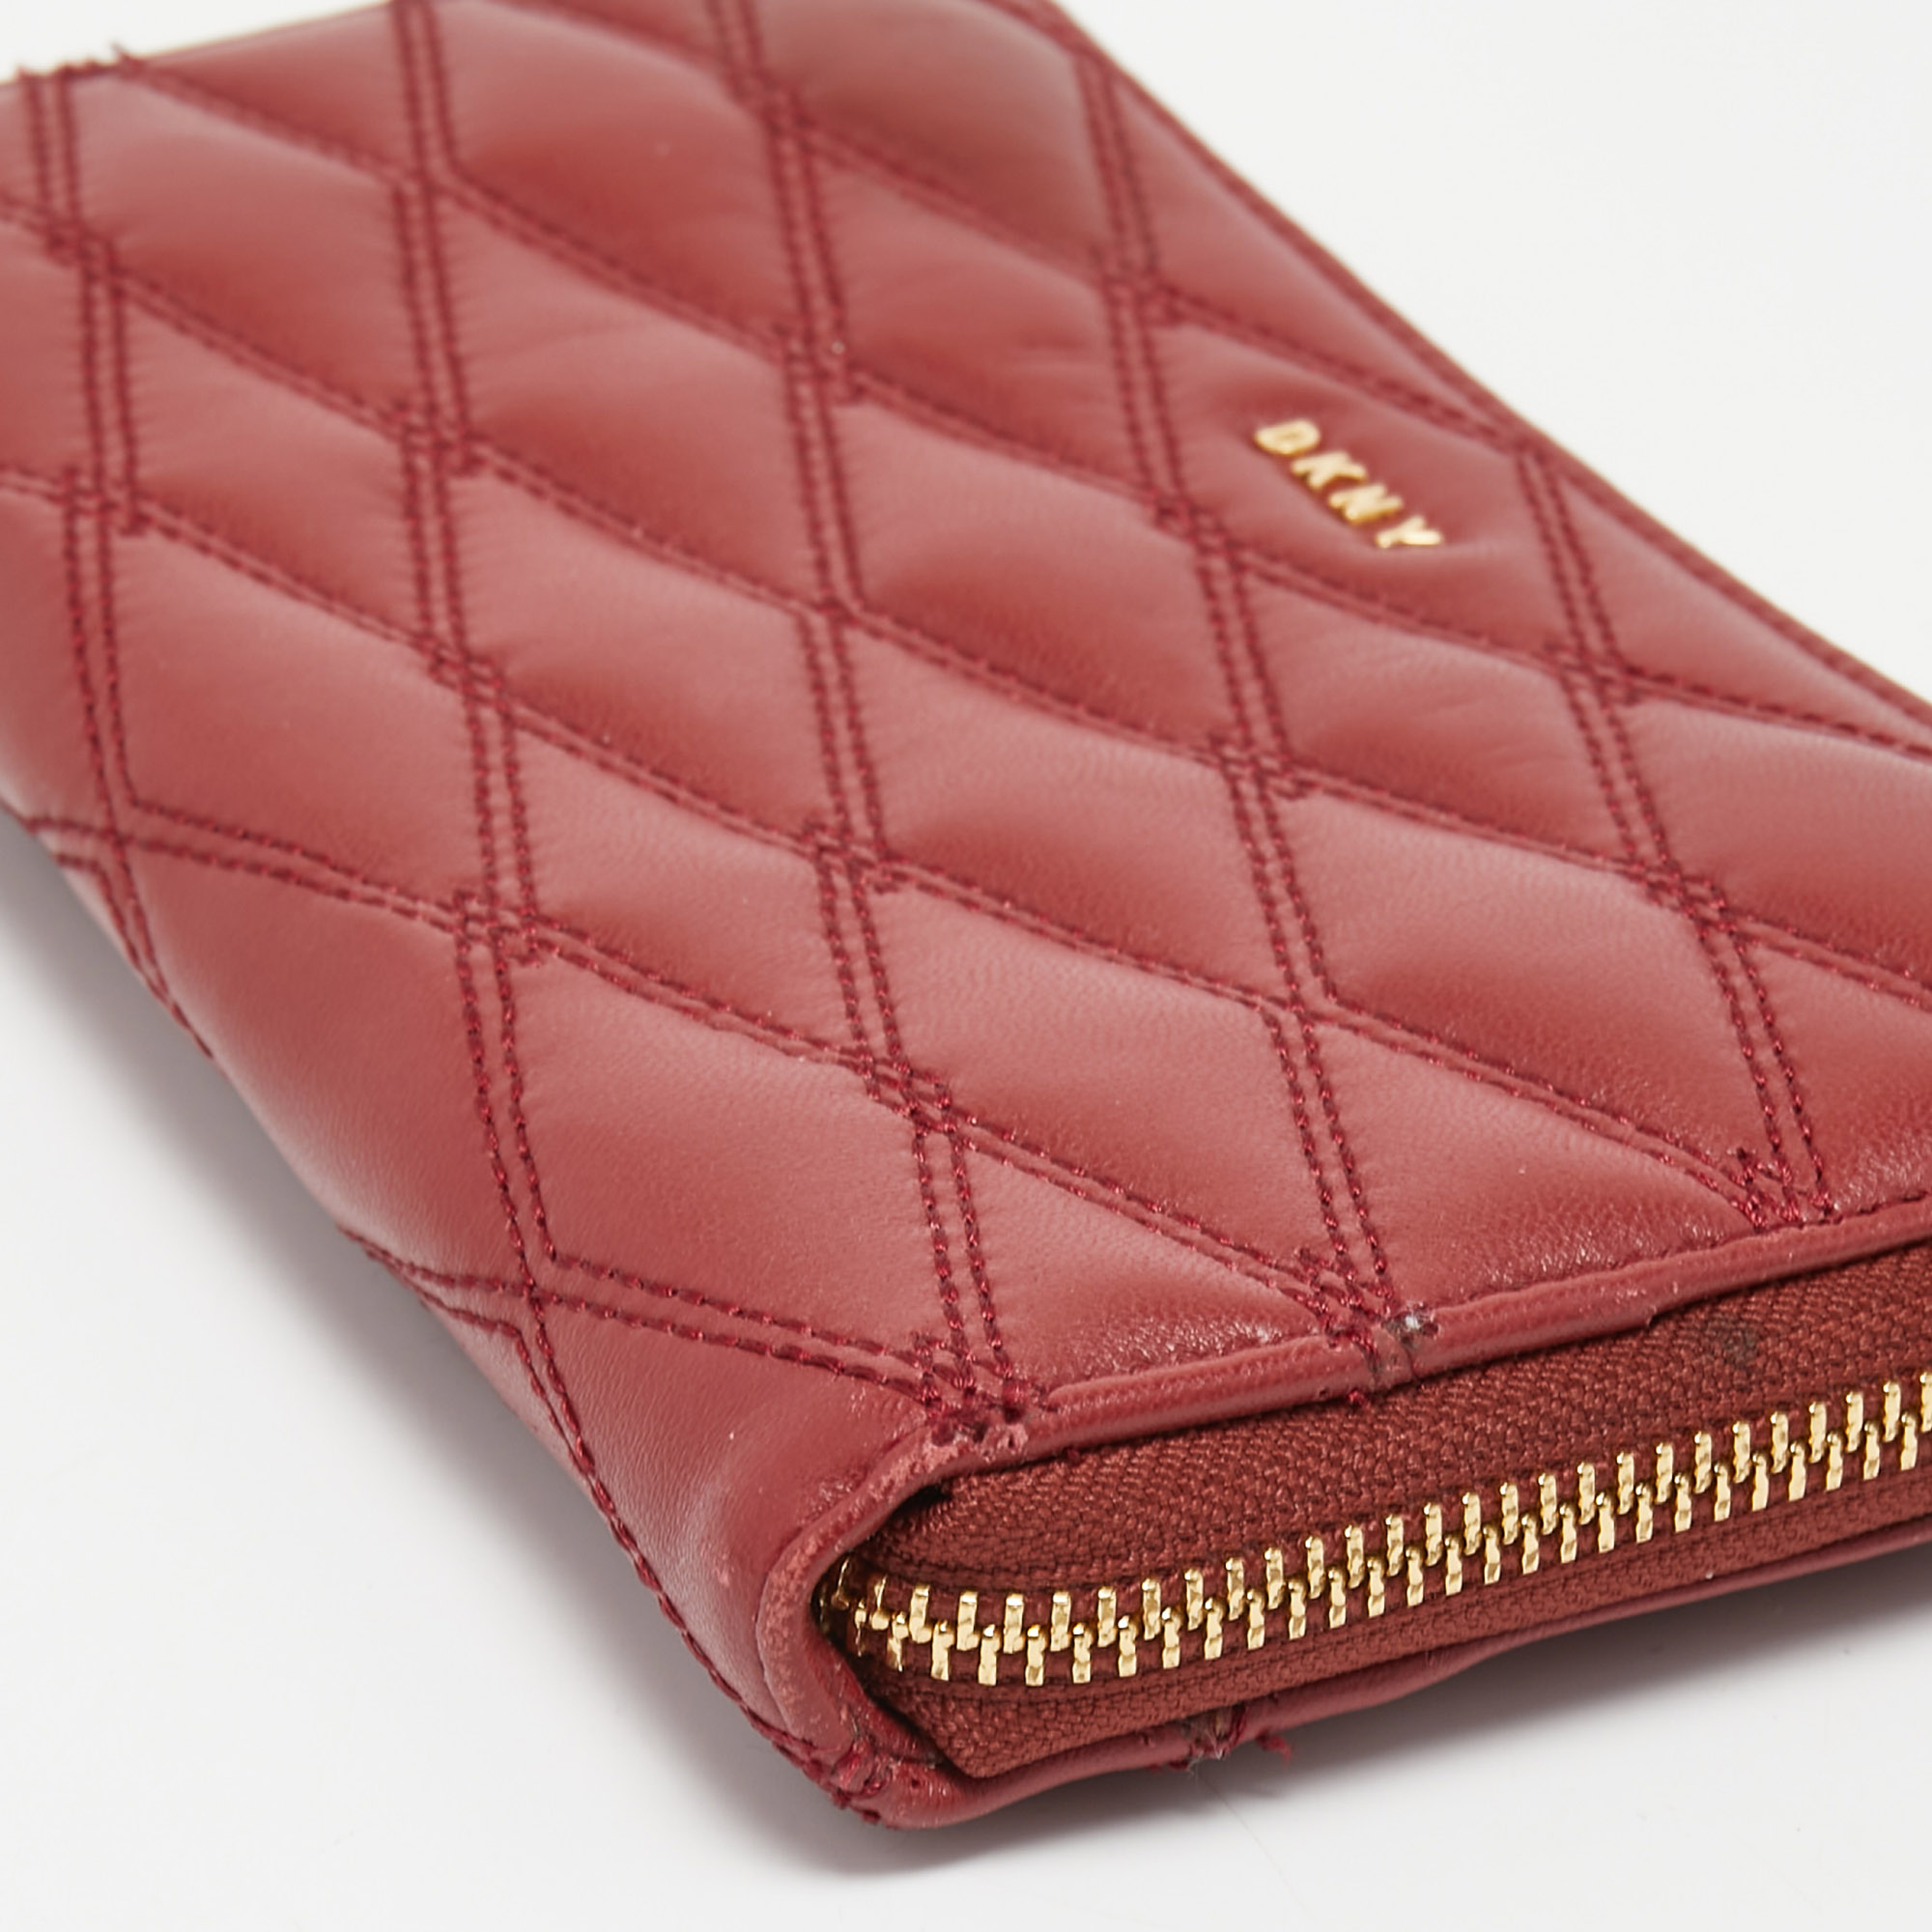 DKNY Red Quilted Leather Zip Around Compact Wallet